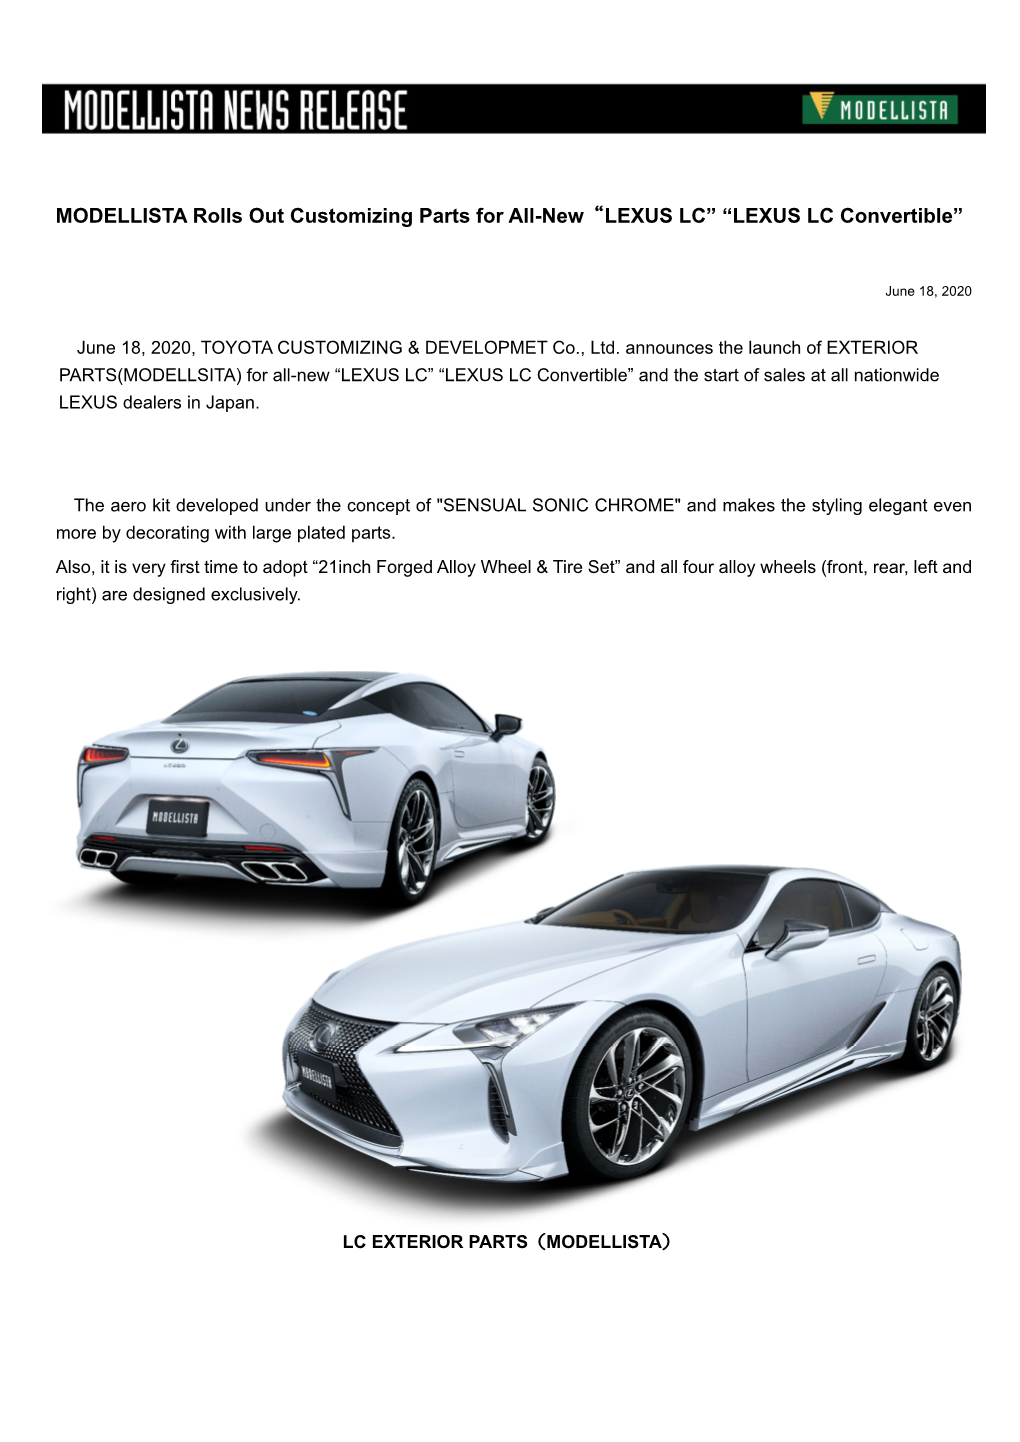 MODELLISTA Rolls out Customizing Parts for All-New“LEXUS LC” “LEXUS LC Convertible”